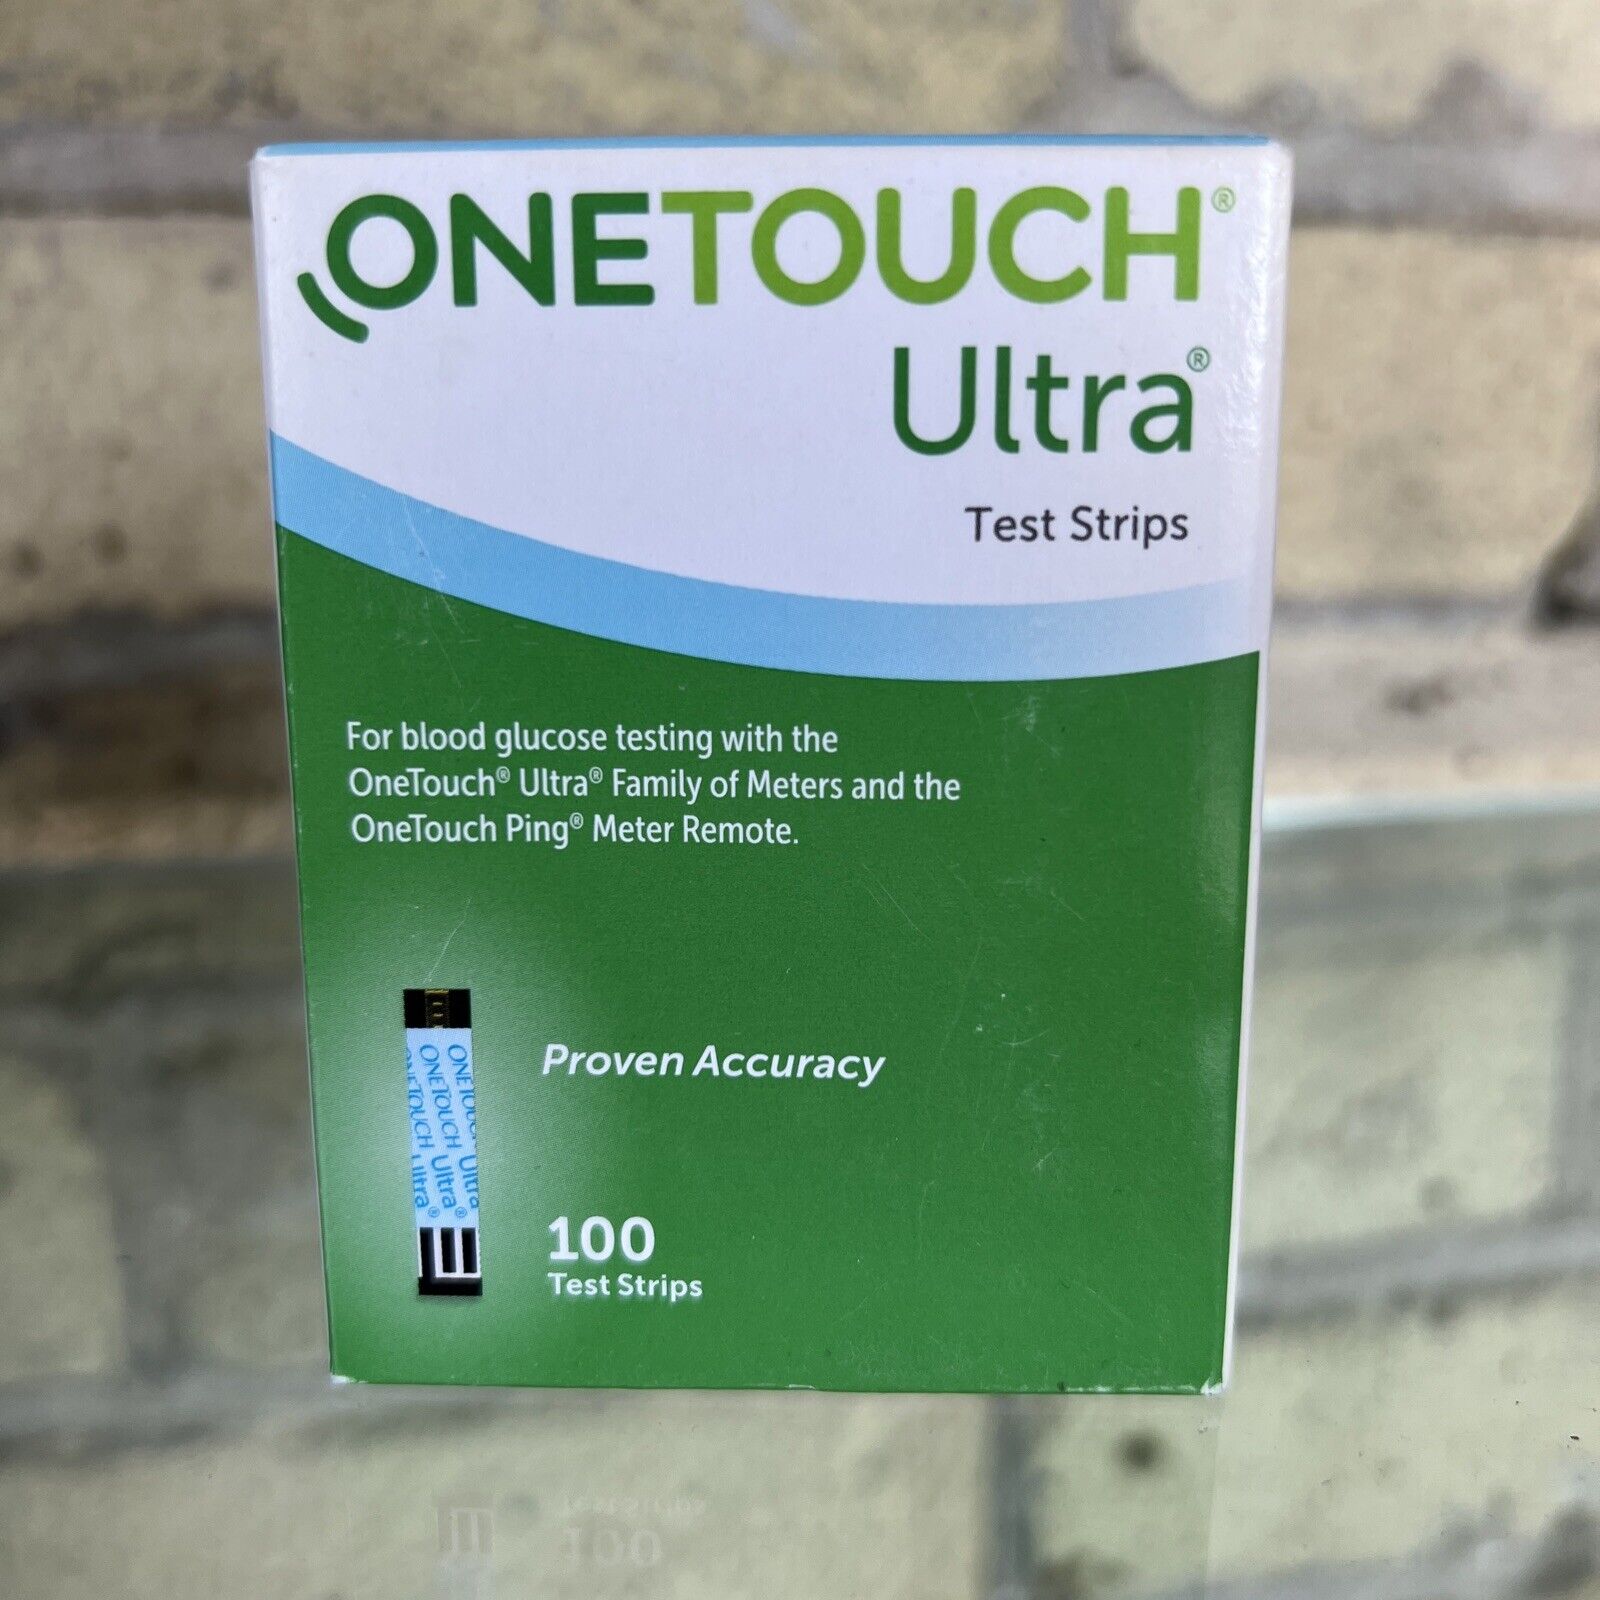 100 One Mail order cheap Touch Sacramento Mall Ultra Test Blue Strips